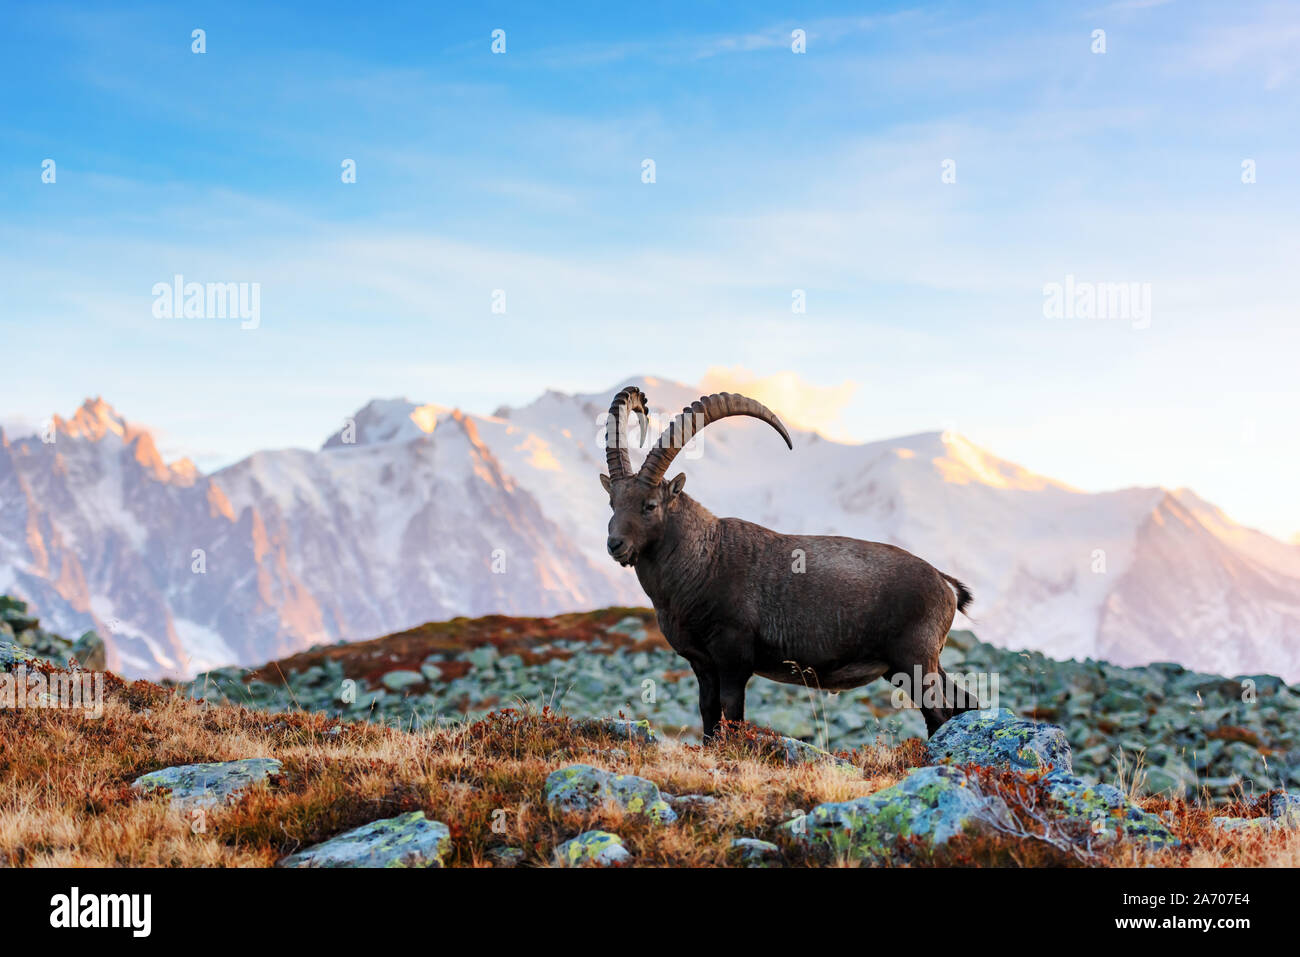 Wild goat (Alpine Carpa Ibex) in the France Alps mountains. Monte Bianco range with Mont Blanc mountain on background Stock Photo